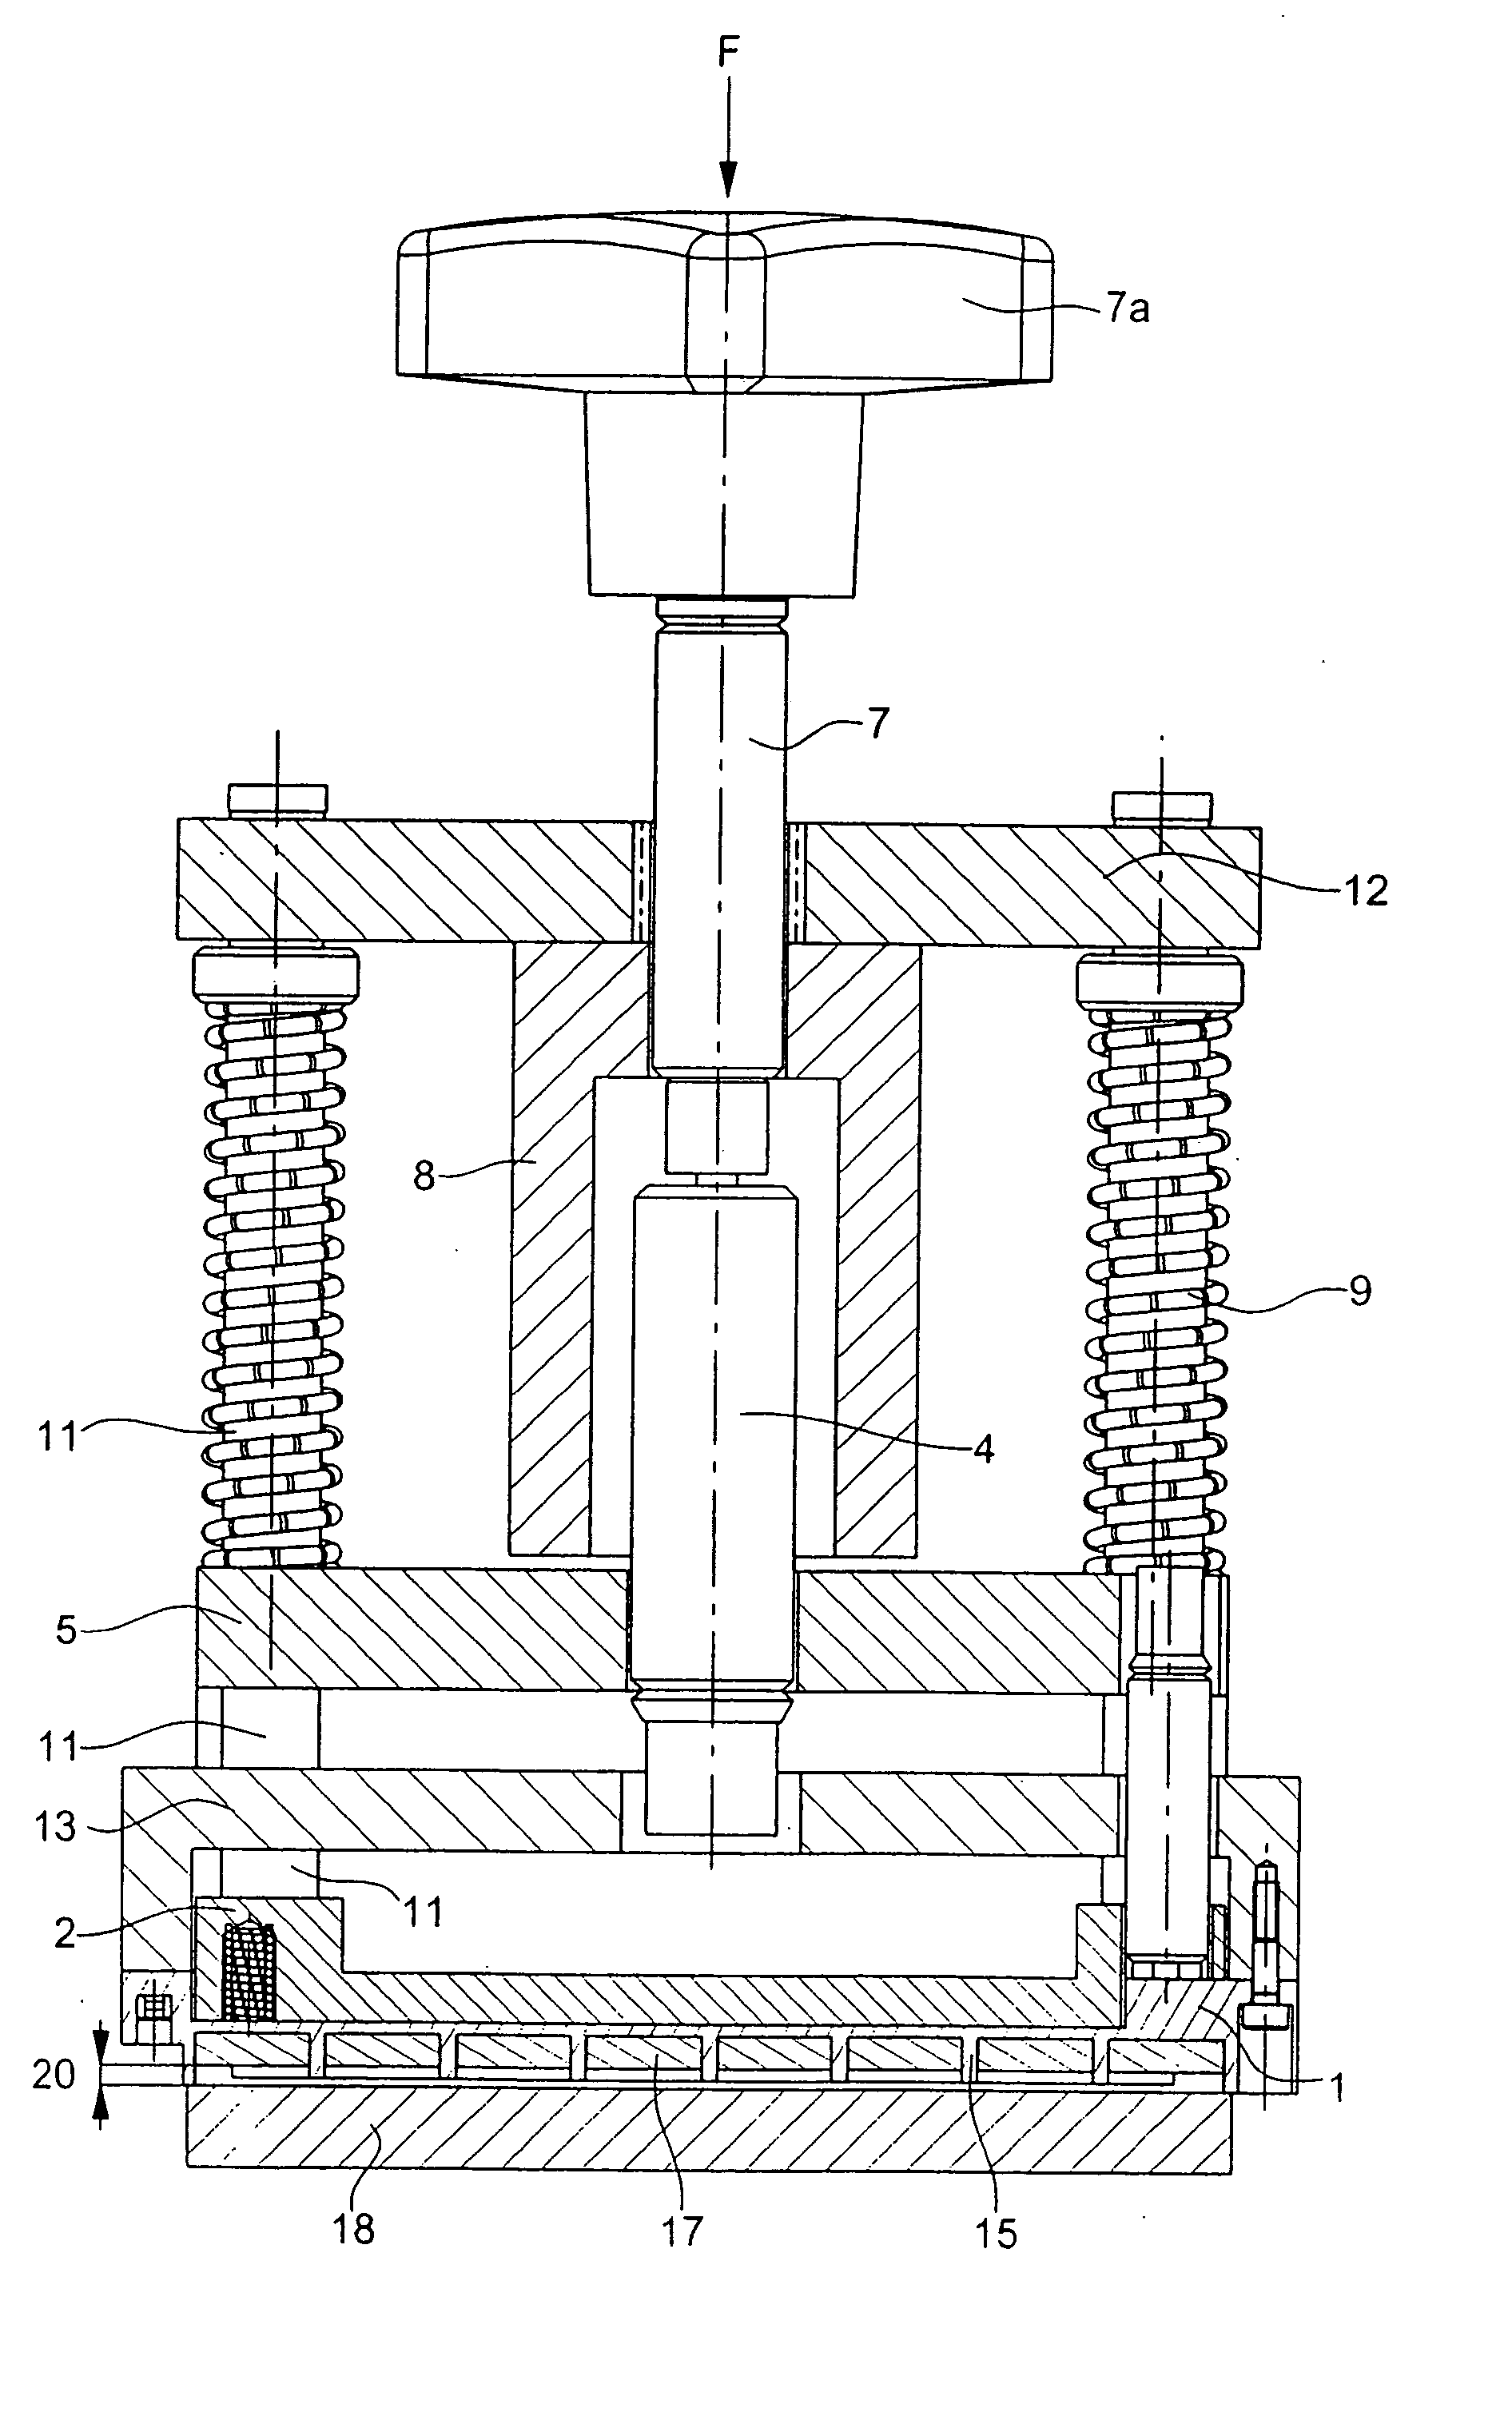 Method and device for positioning and affixing magnets on a magnetic yoke member of a motor